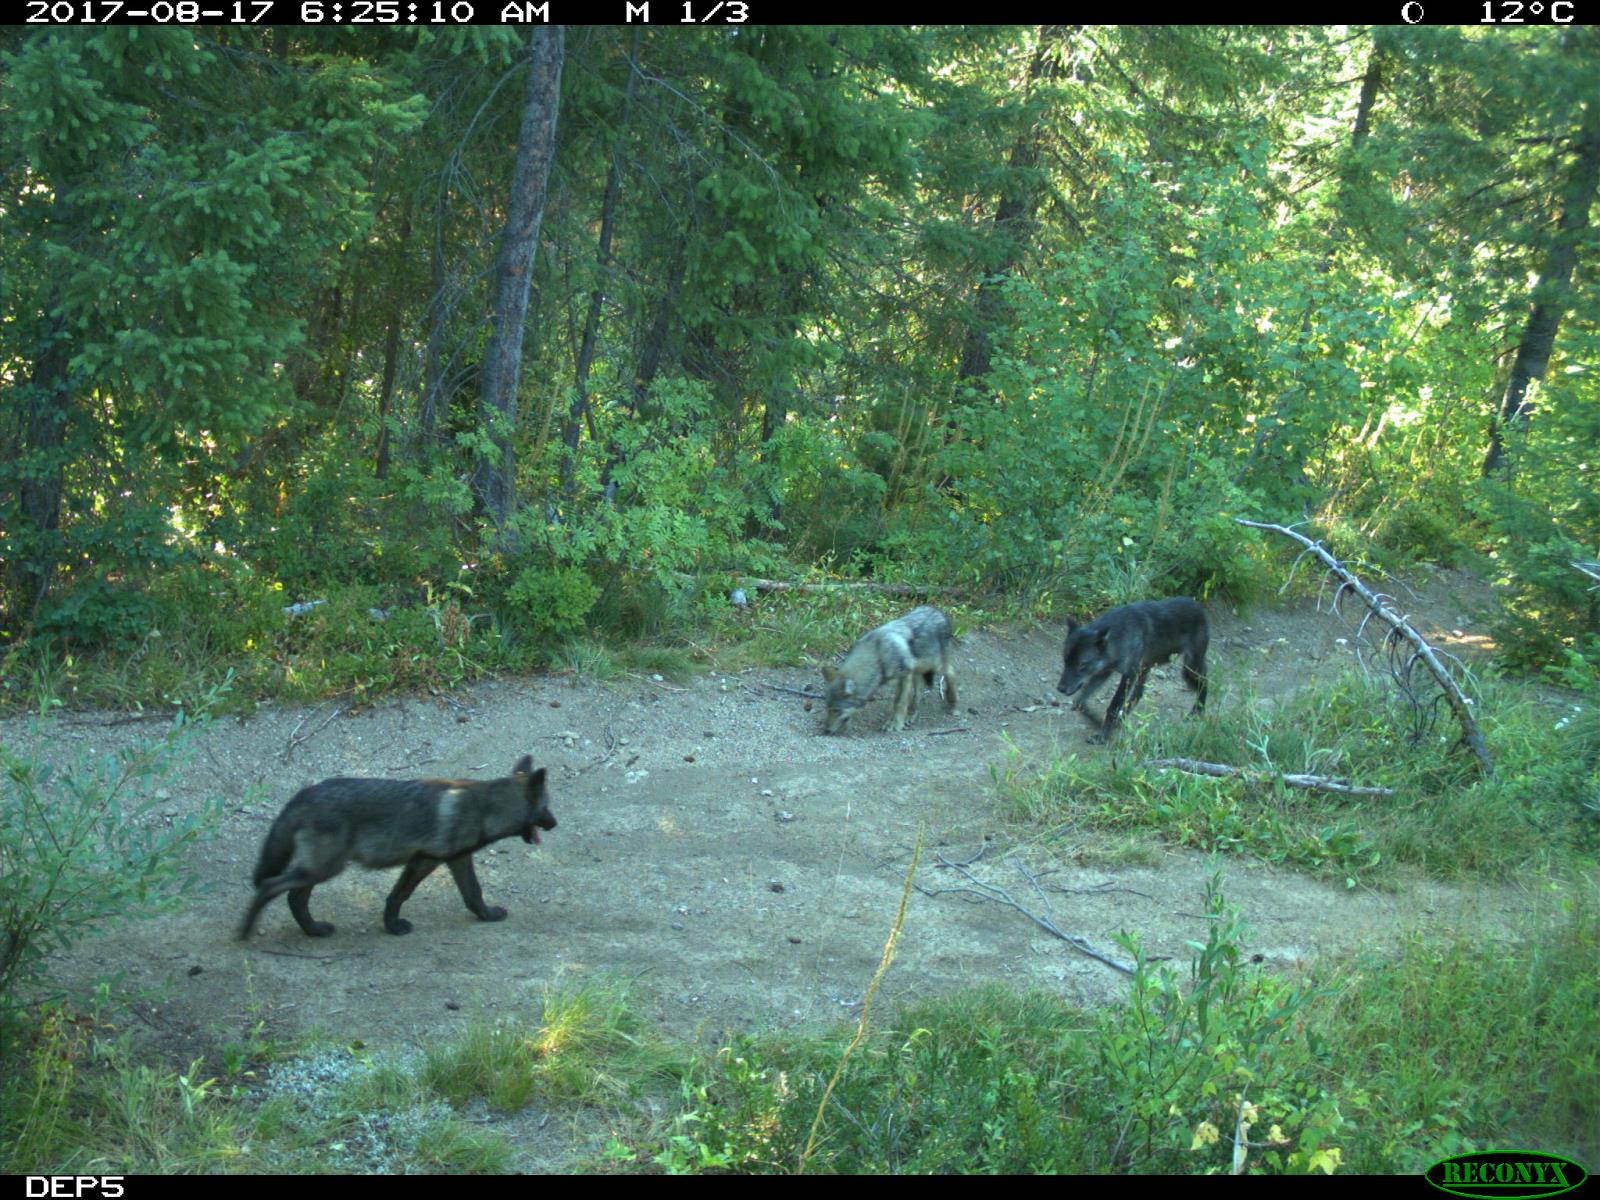 Idaho Offers to Pay Hunters Up to 2,500 to Cull Wolf Population